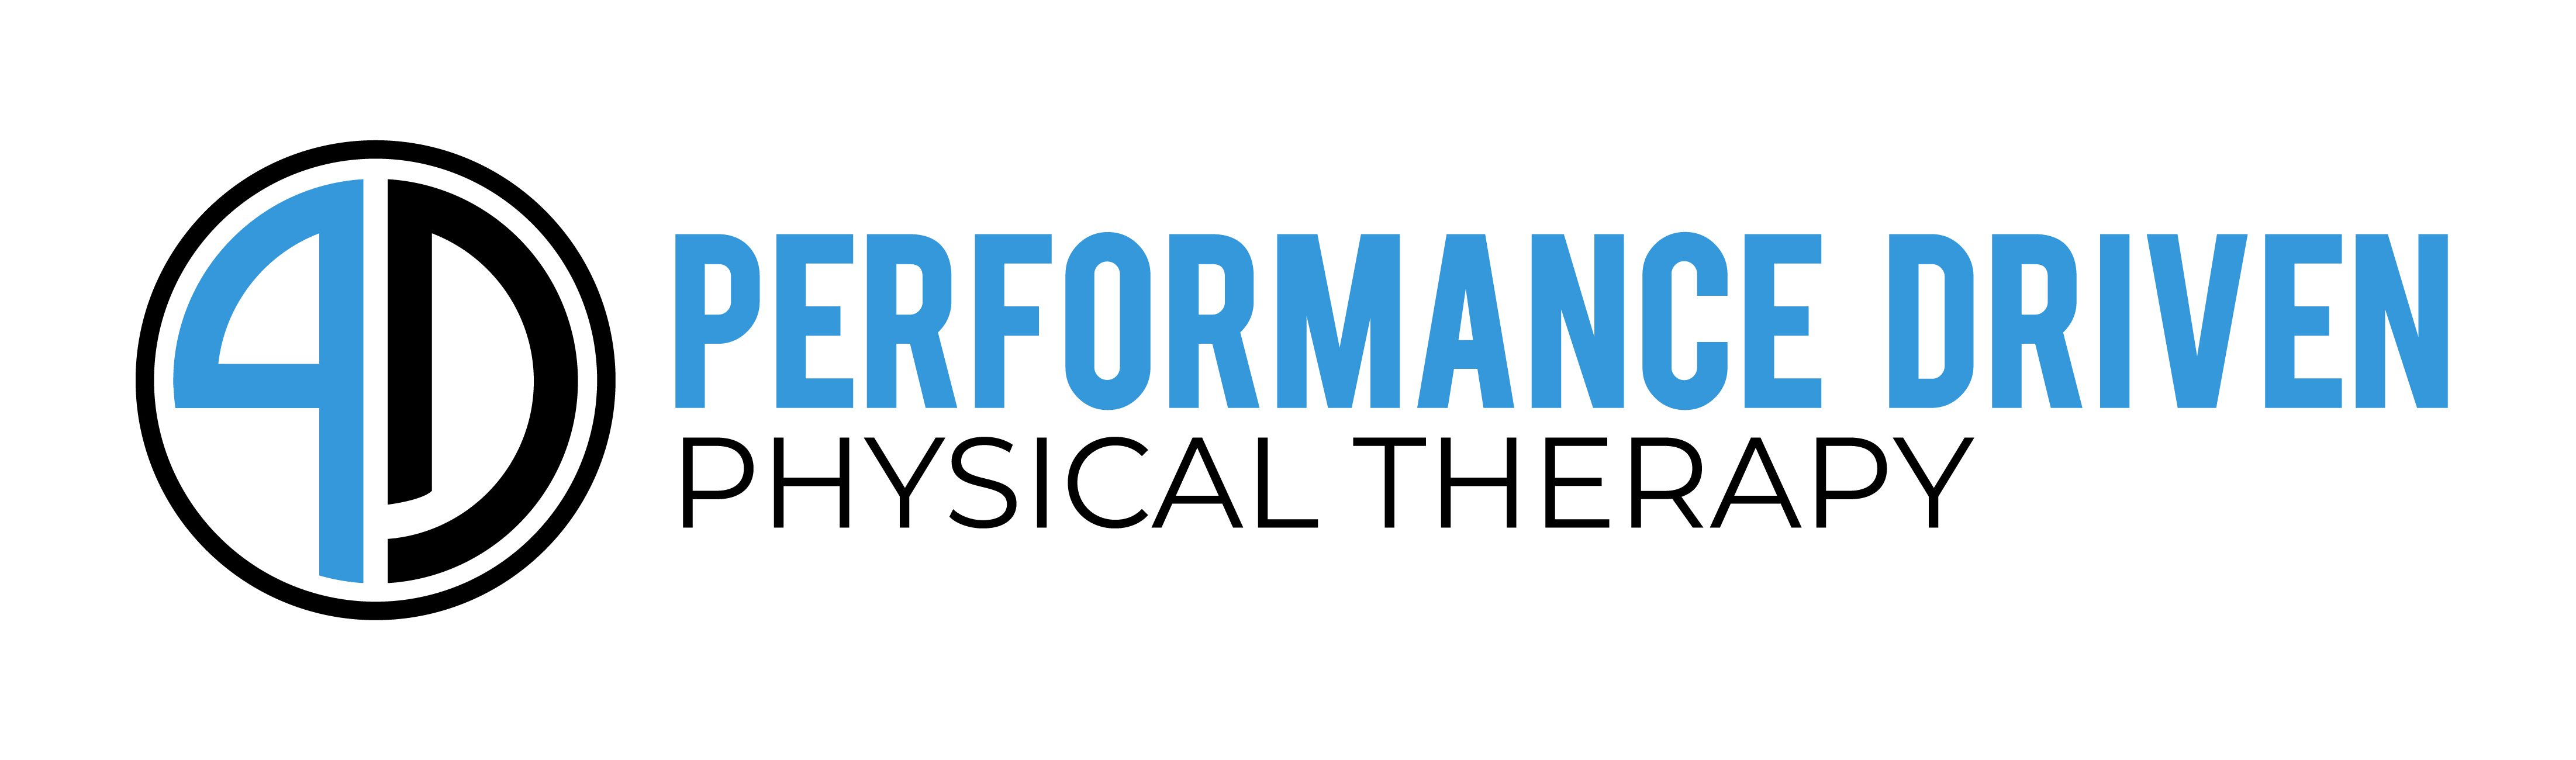 Performance Driven Physical Therapy LLC